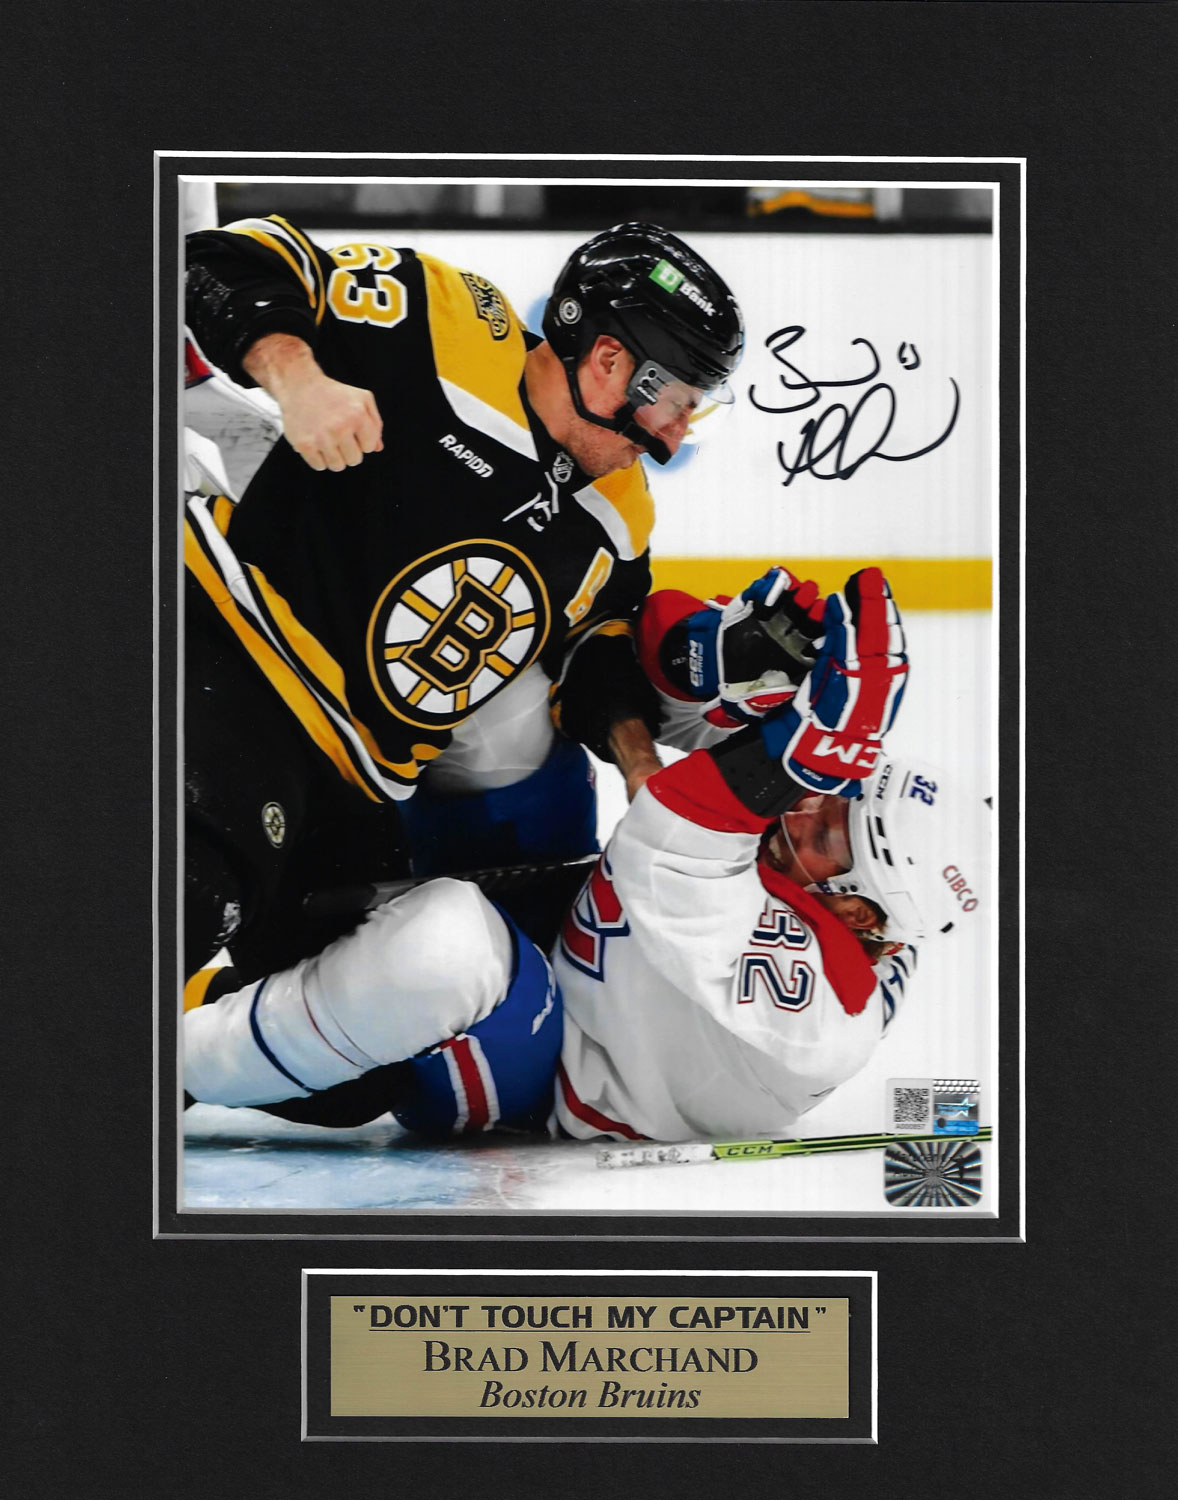 Brad Marchand and David Pastrnak Signed / Autographed Photo 16x20 Frame